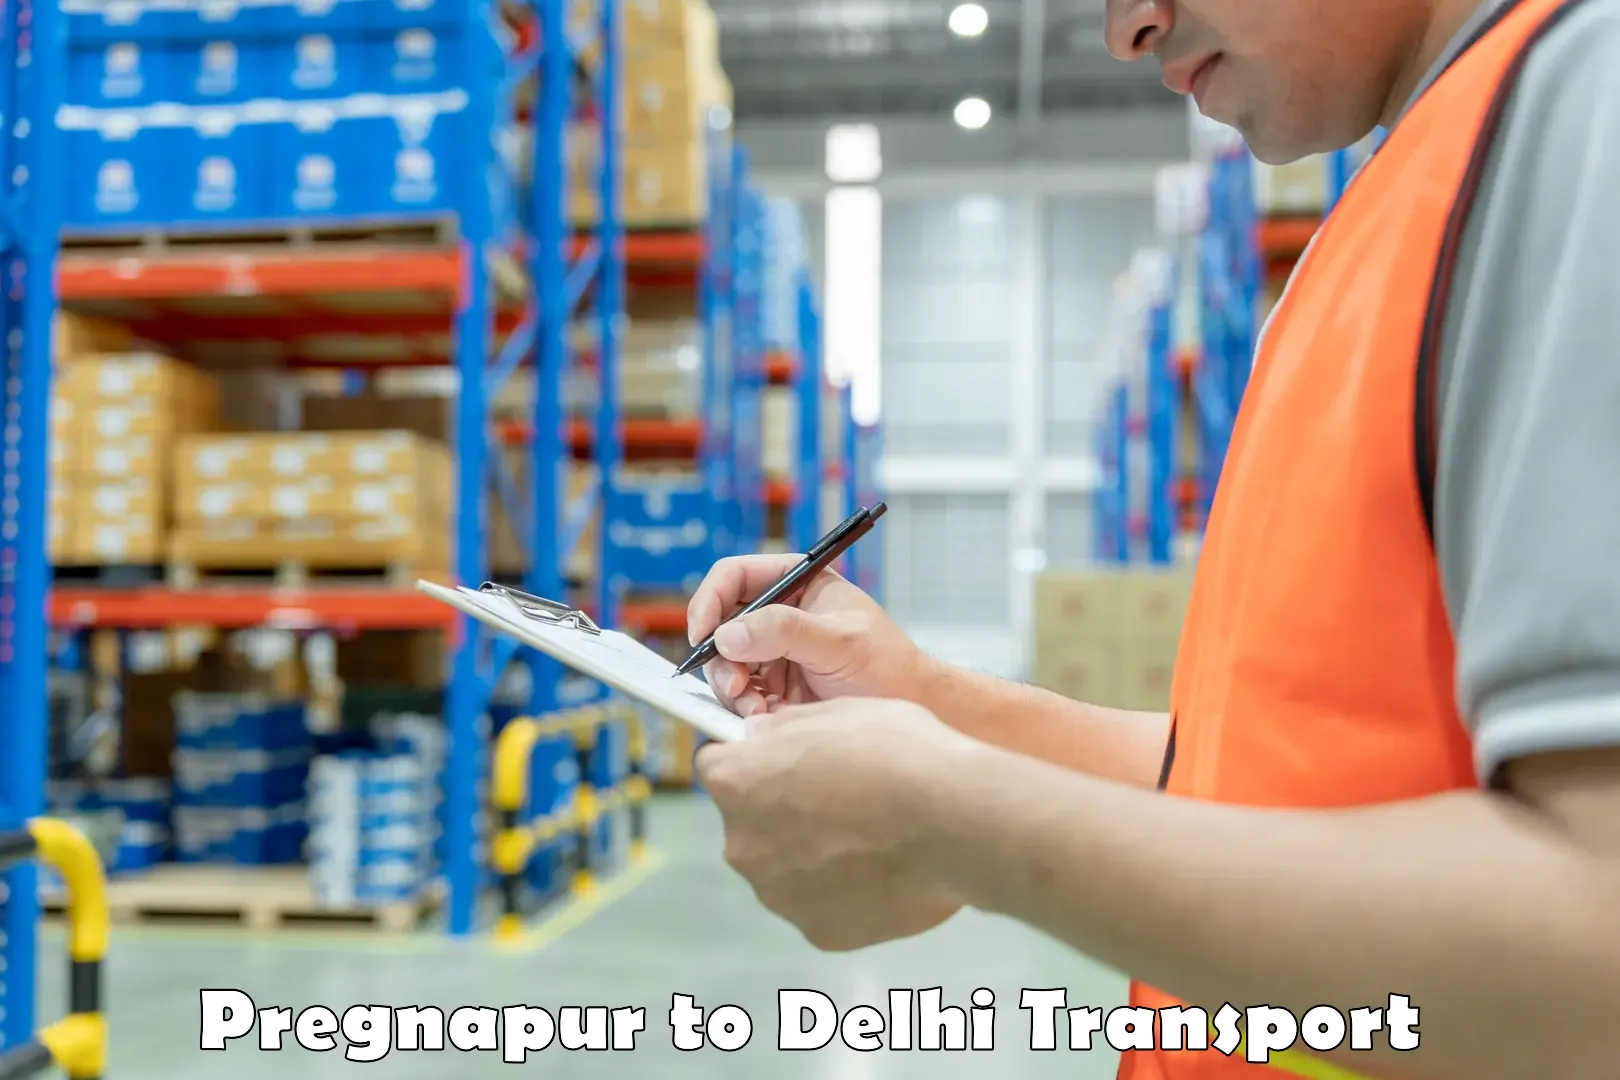 Road transport online services Pregnapur to Indraprastha